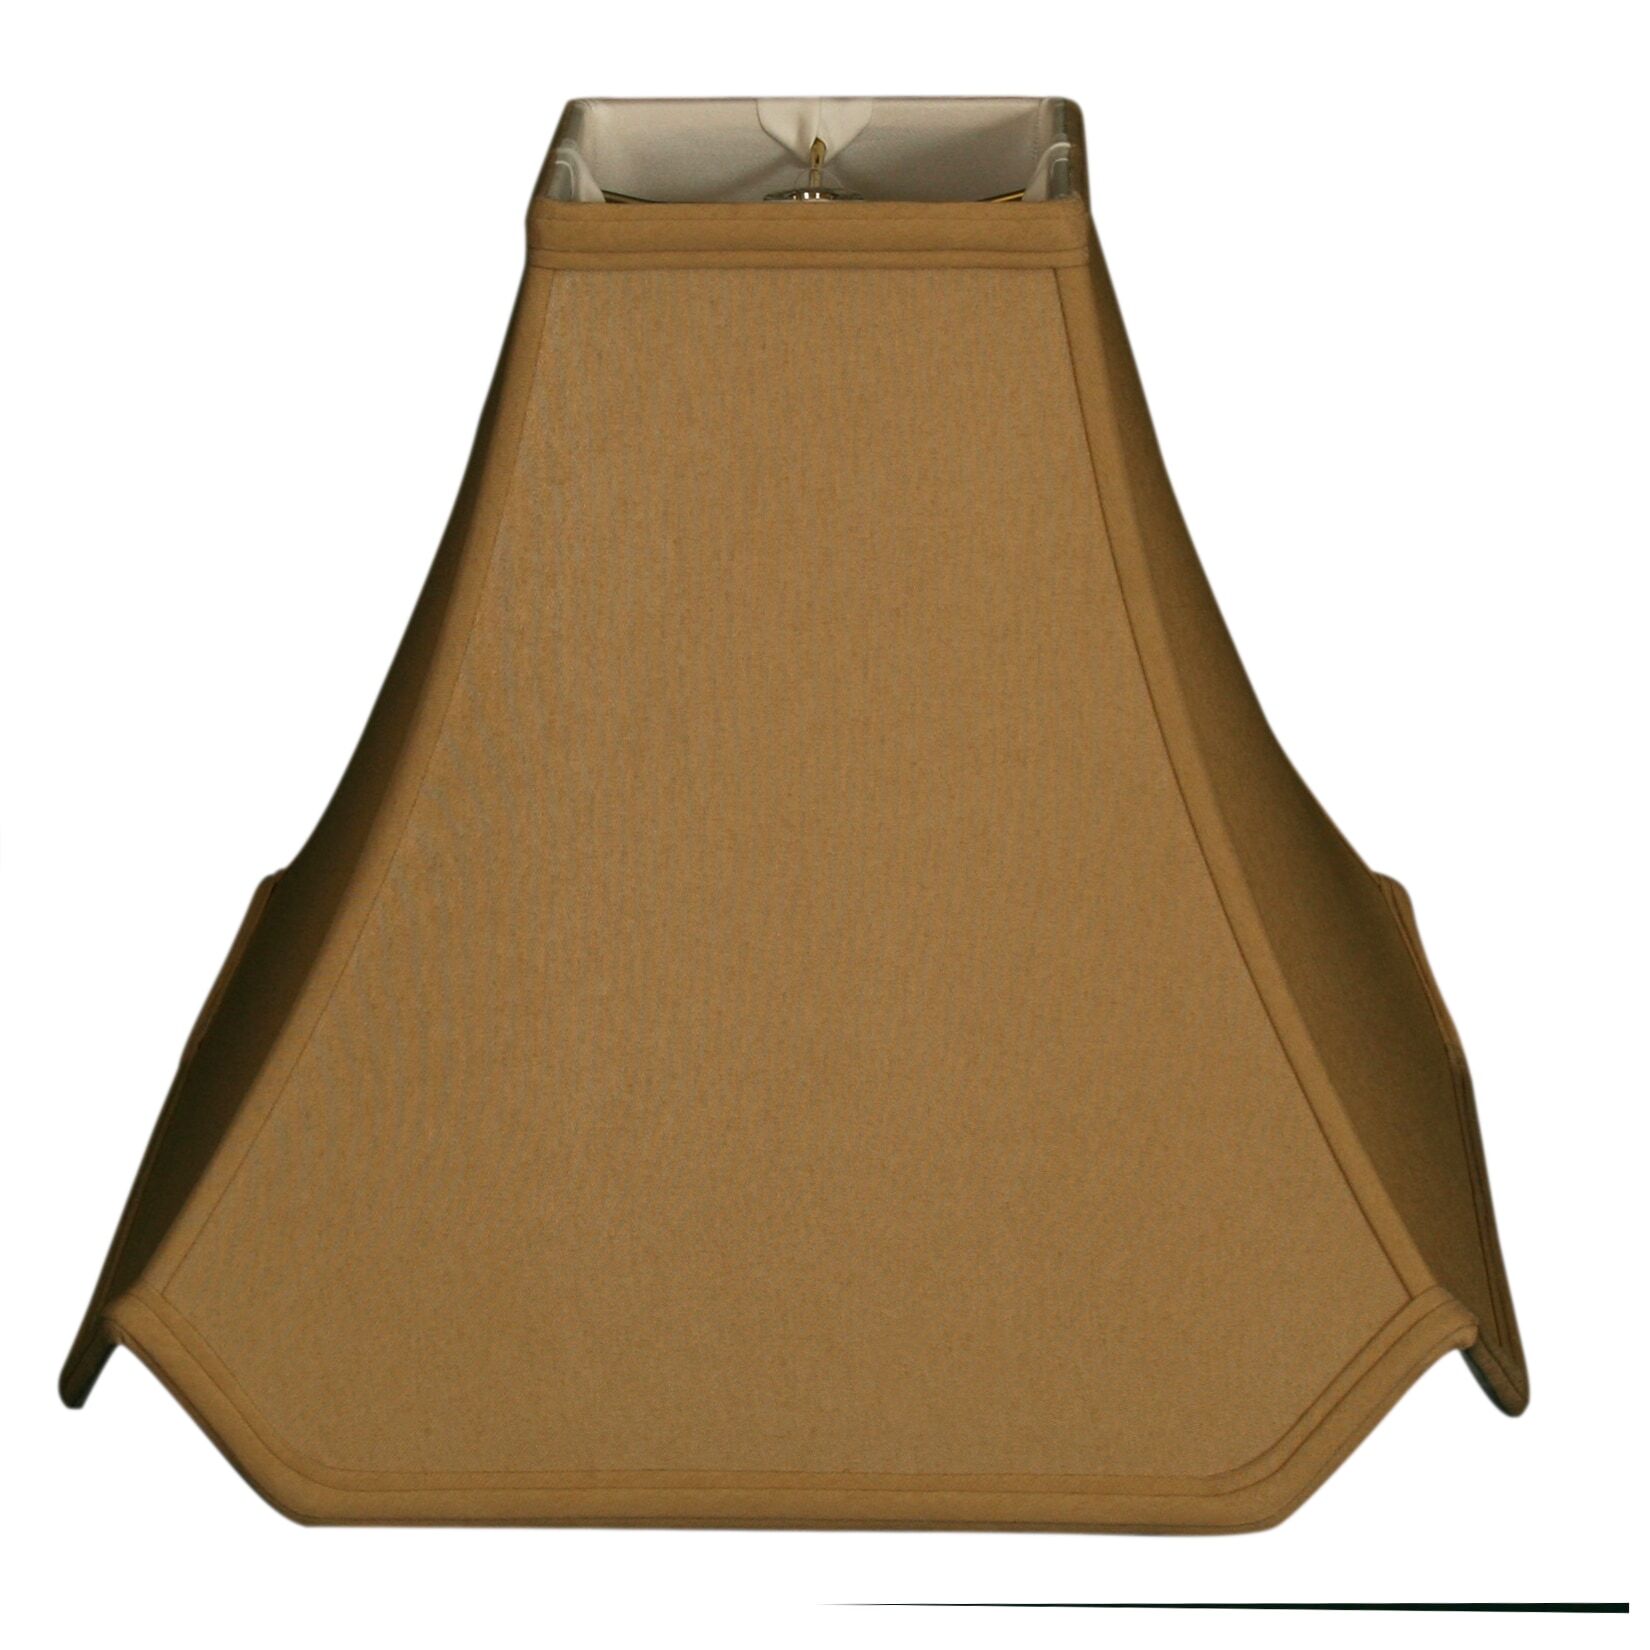 Oriental Pagoda Lampshades with Pinched Corners